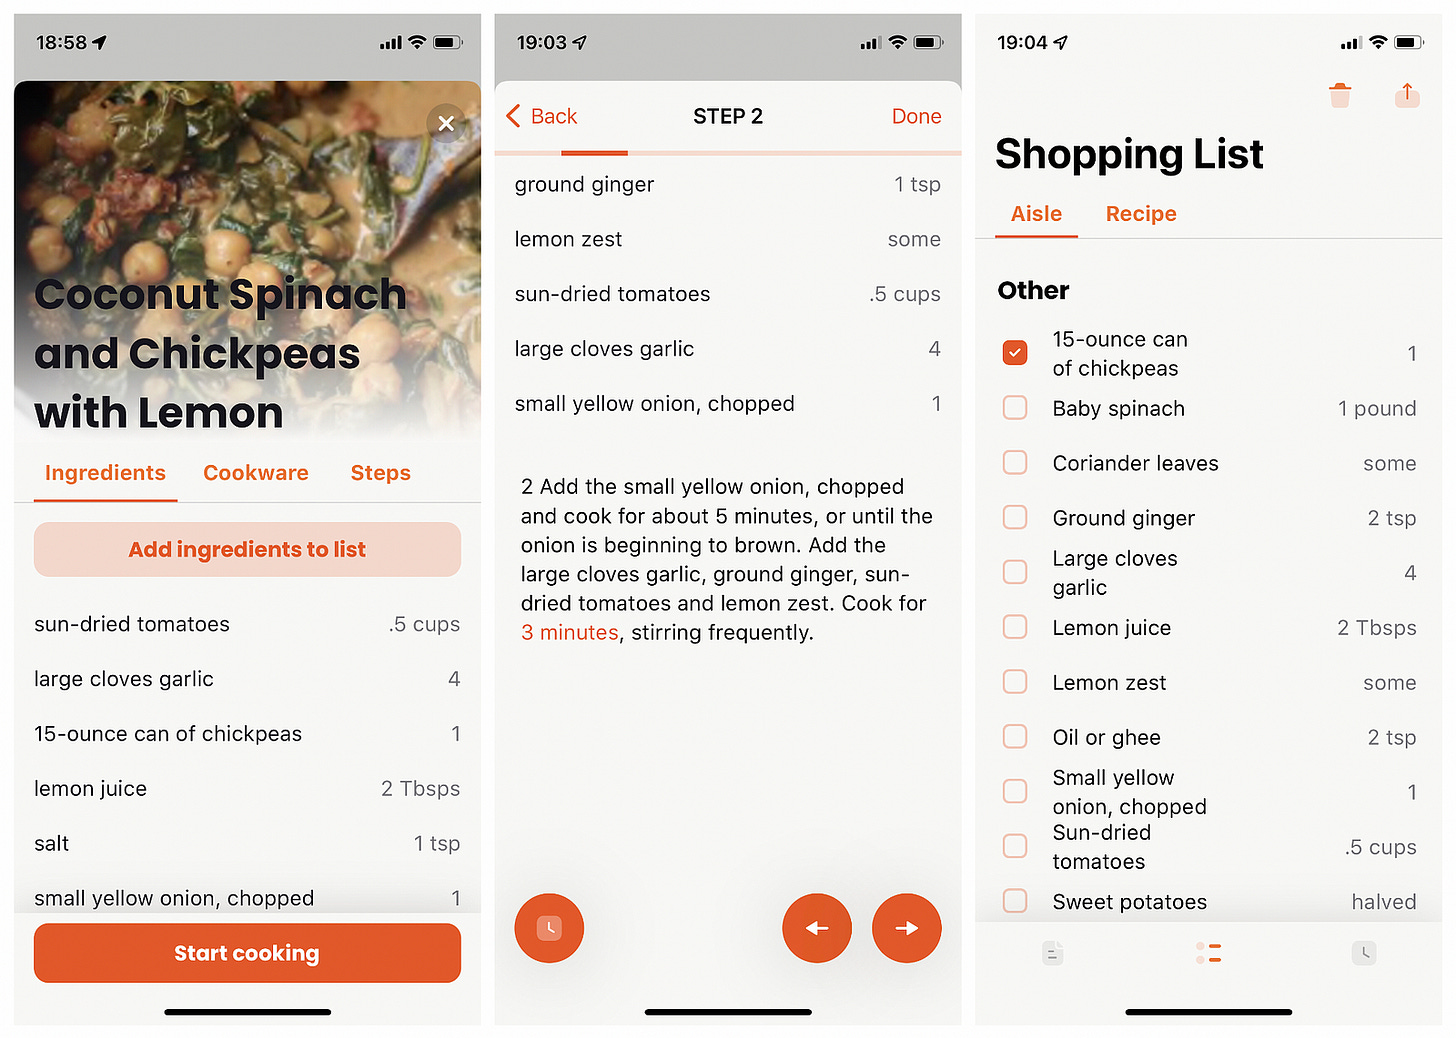 3 screenshots from the Cooklang app showing ingredients, method, and shopping list